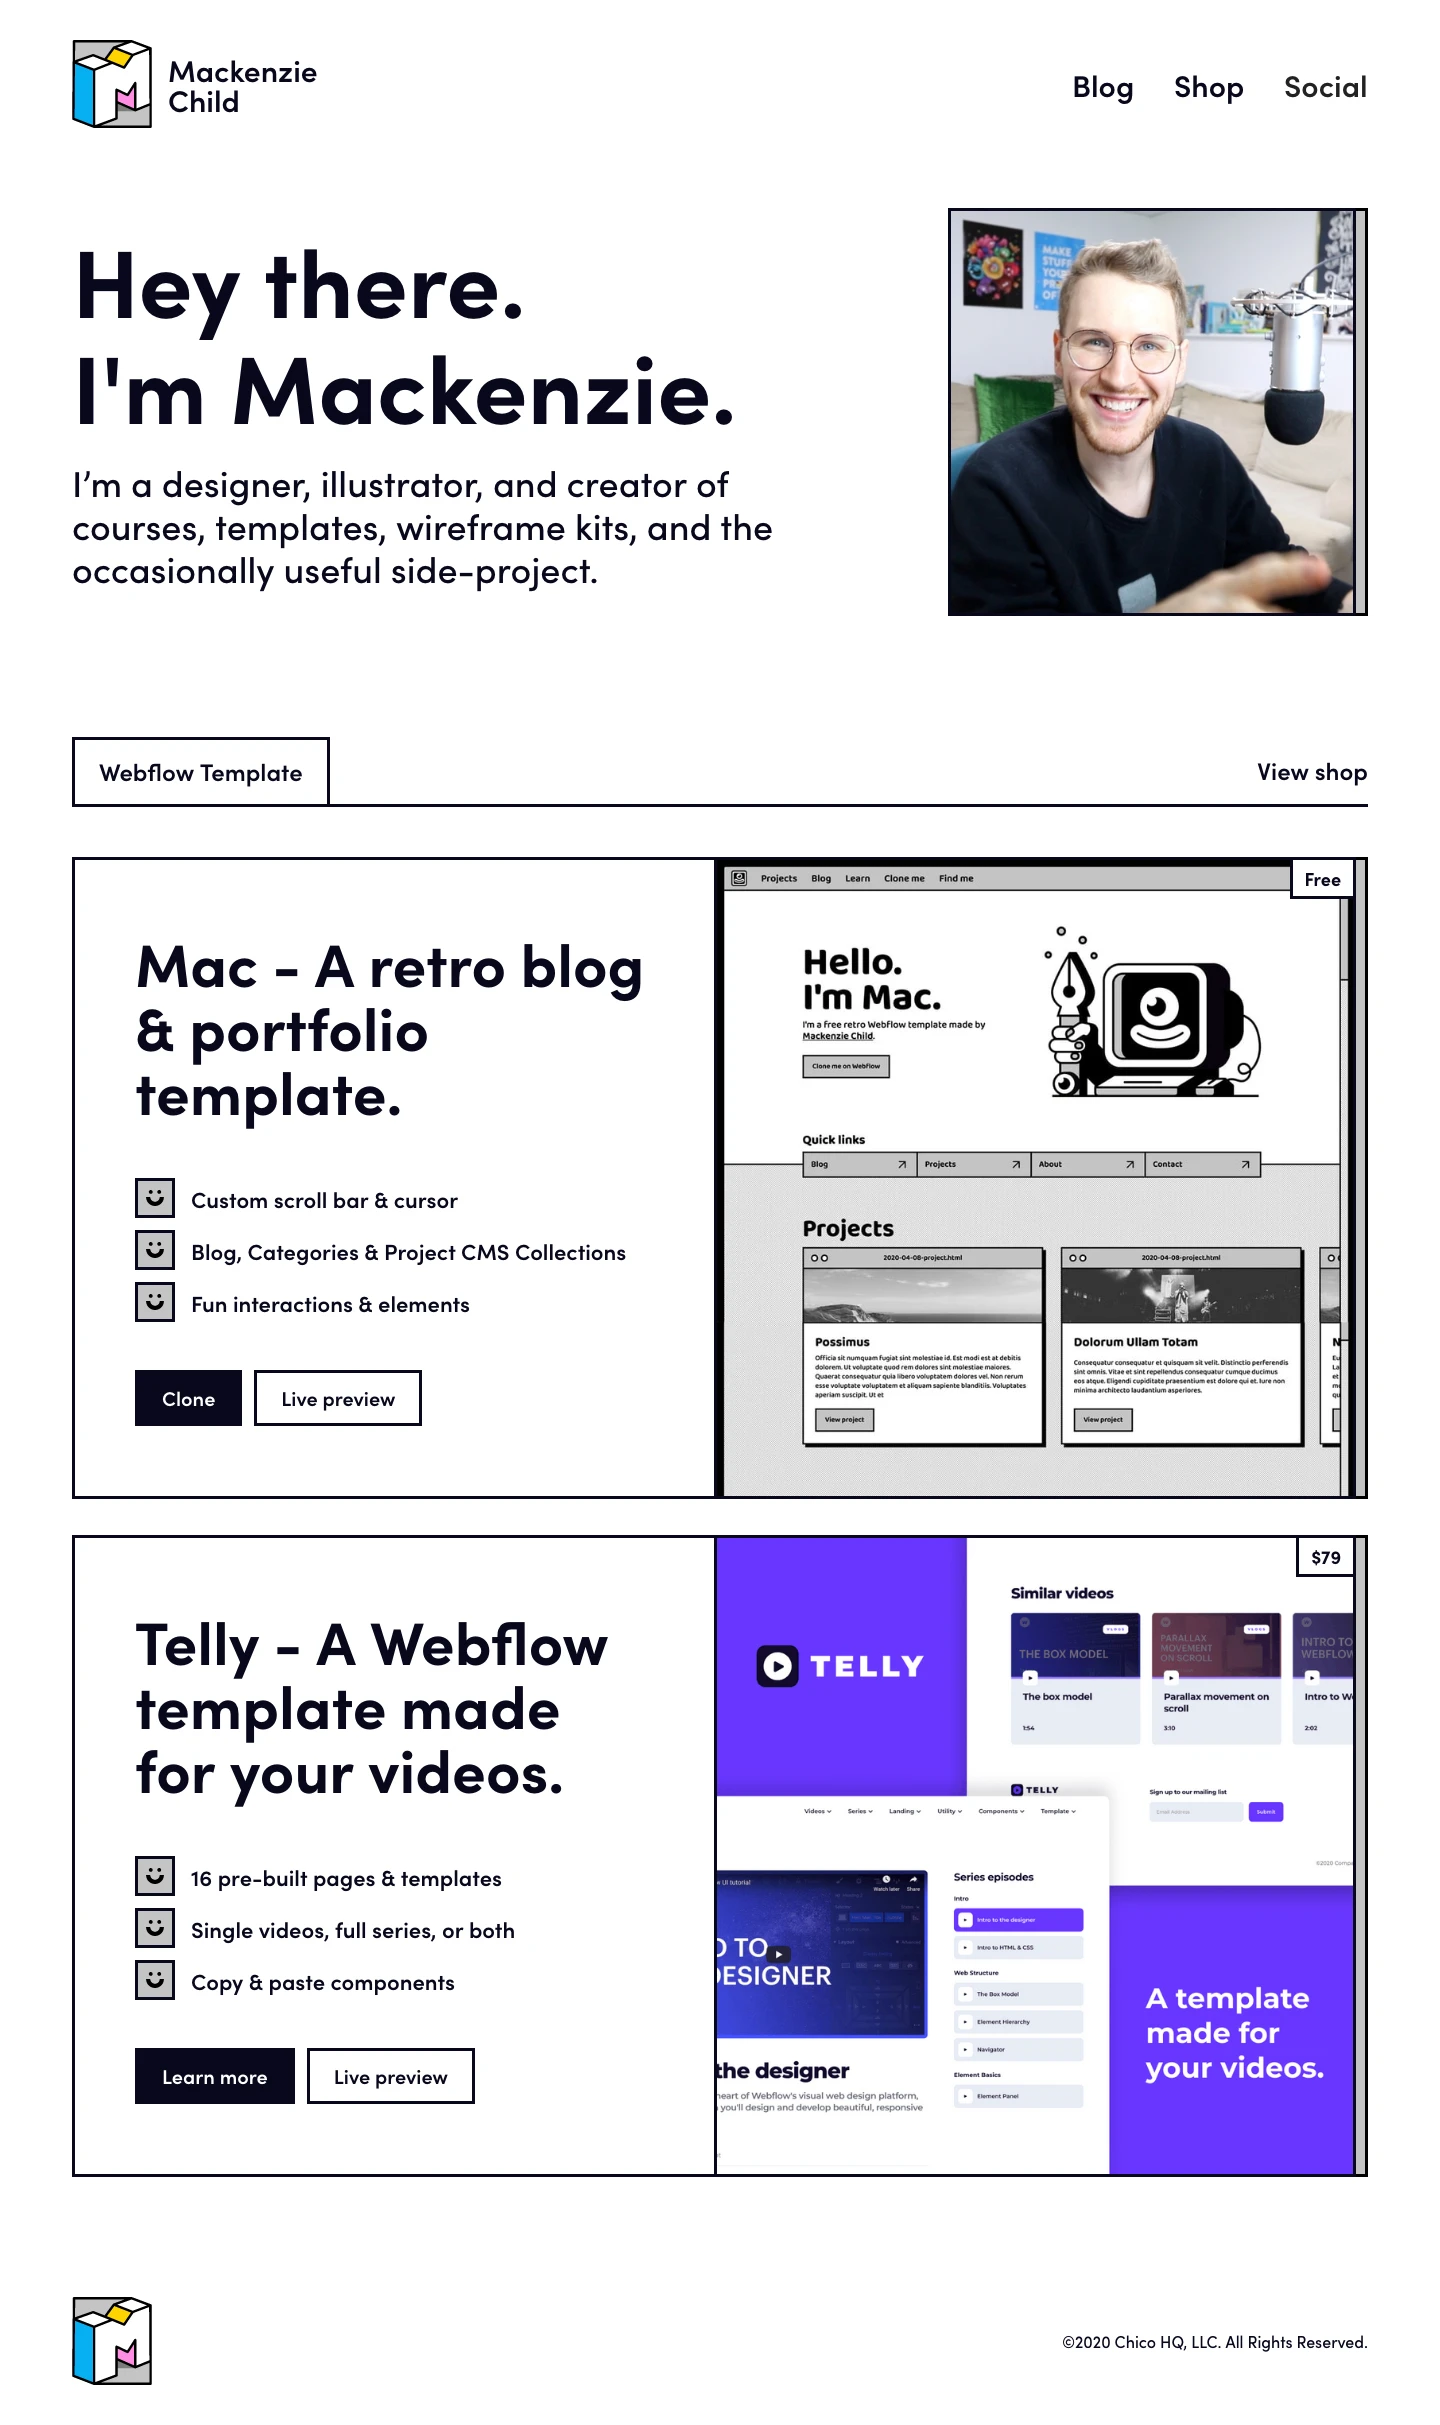 Mackenzie Child Landing Page Example: I’m a designer, illustrator, and creator of courses, templates, wireframe kits, and the occasionally useful side-project.